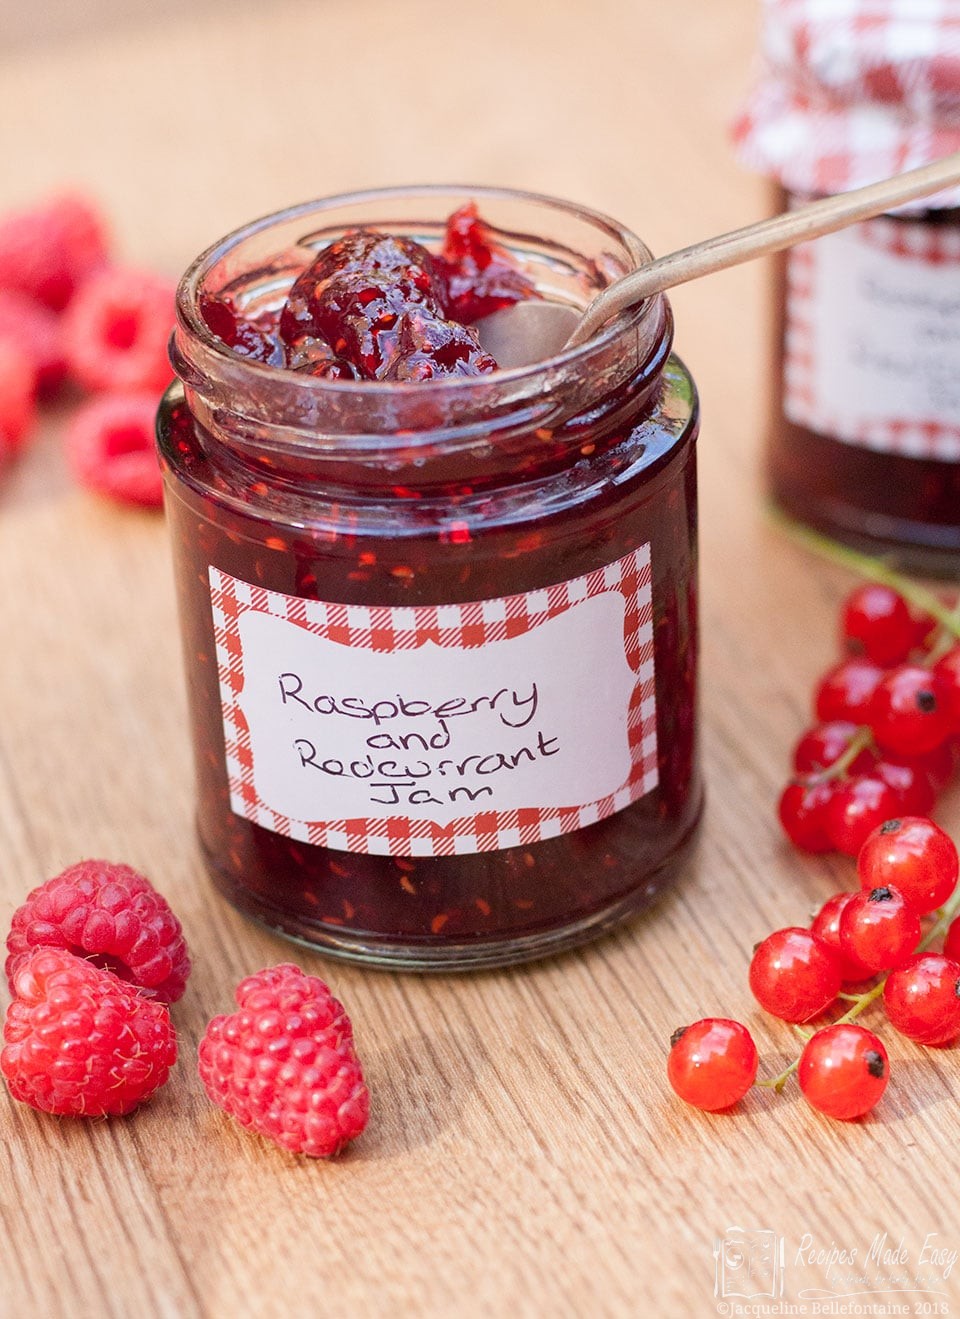 Open jar of raspebrry and redcurrant jam by recipes made easy. Spoon in jar and surrounded by raspberries and redcurrants.